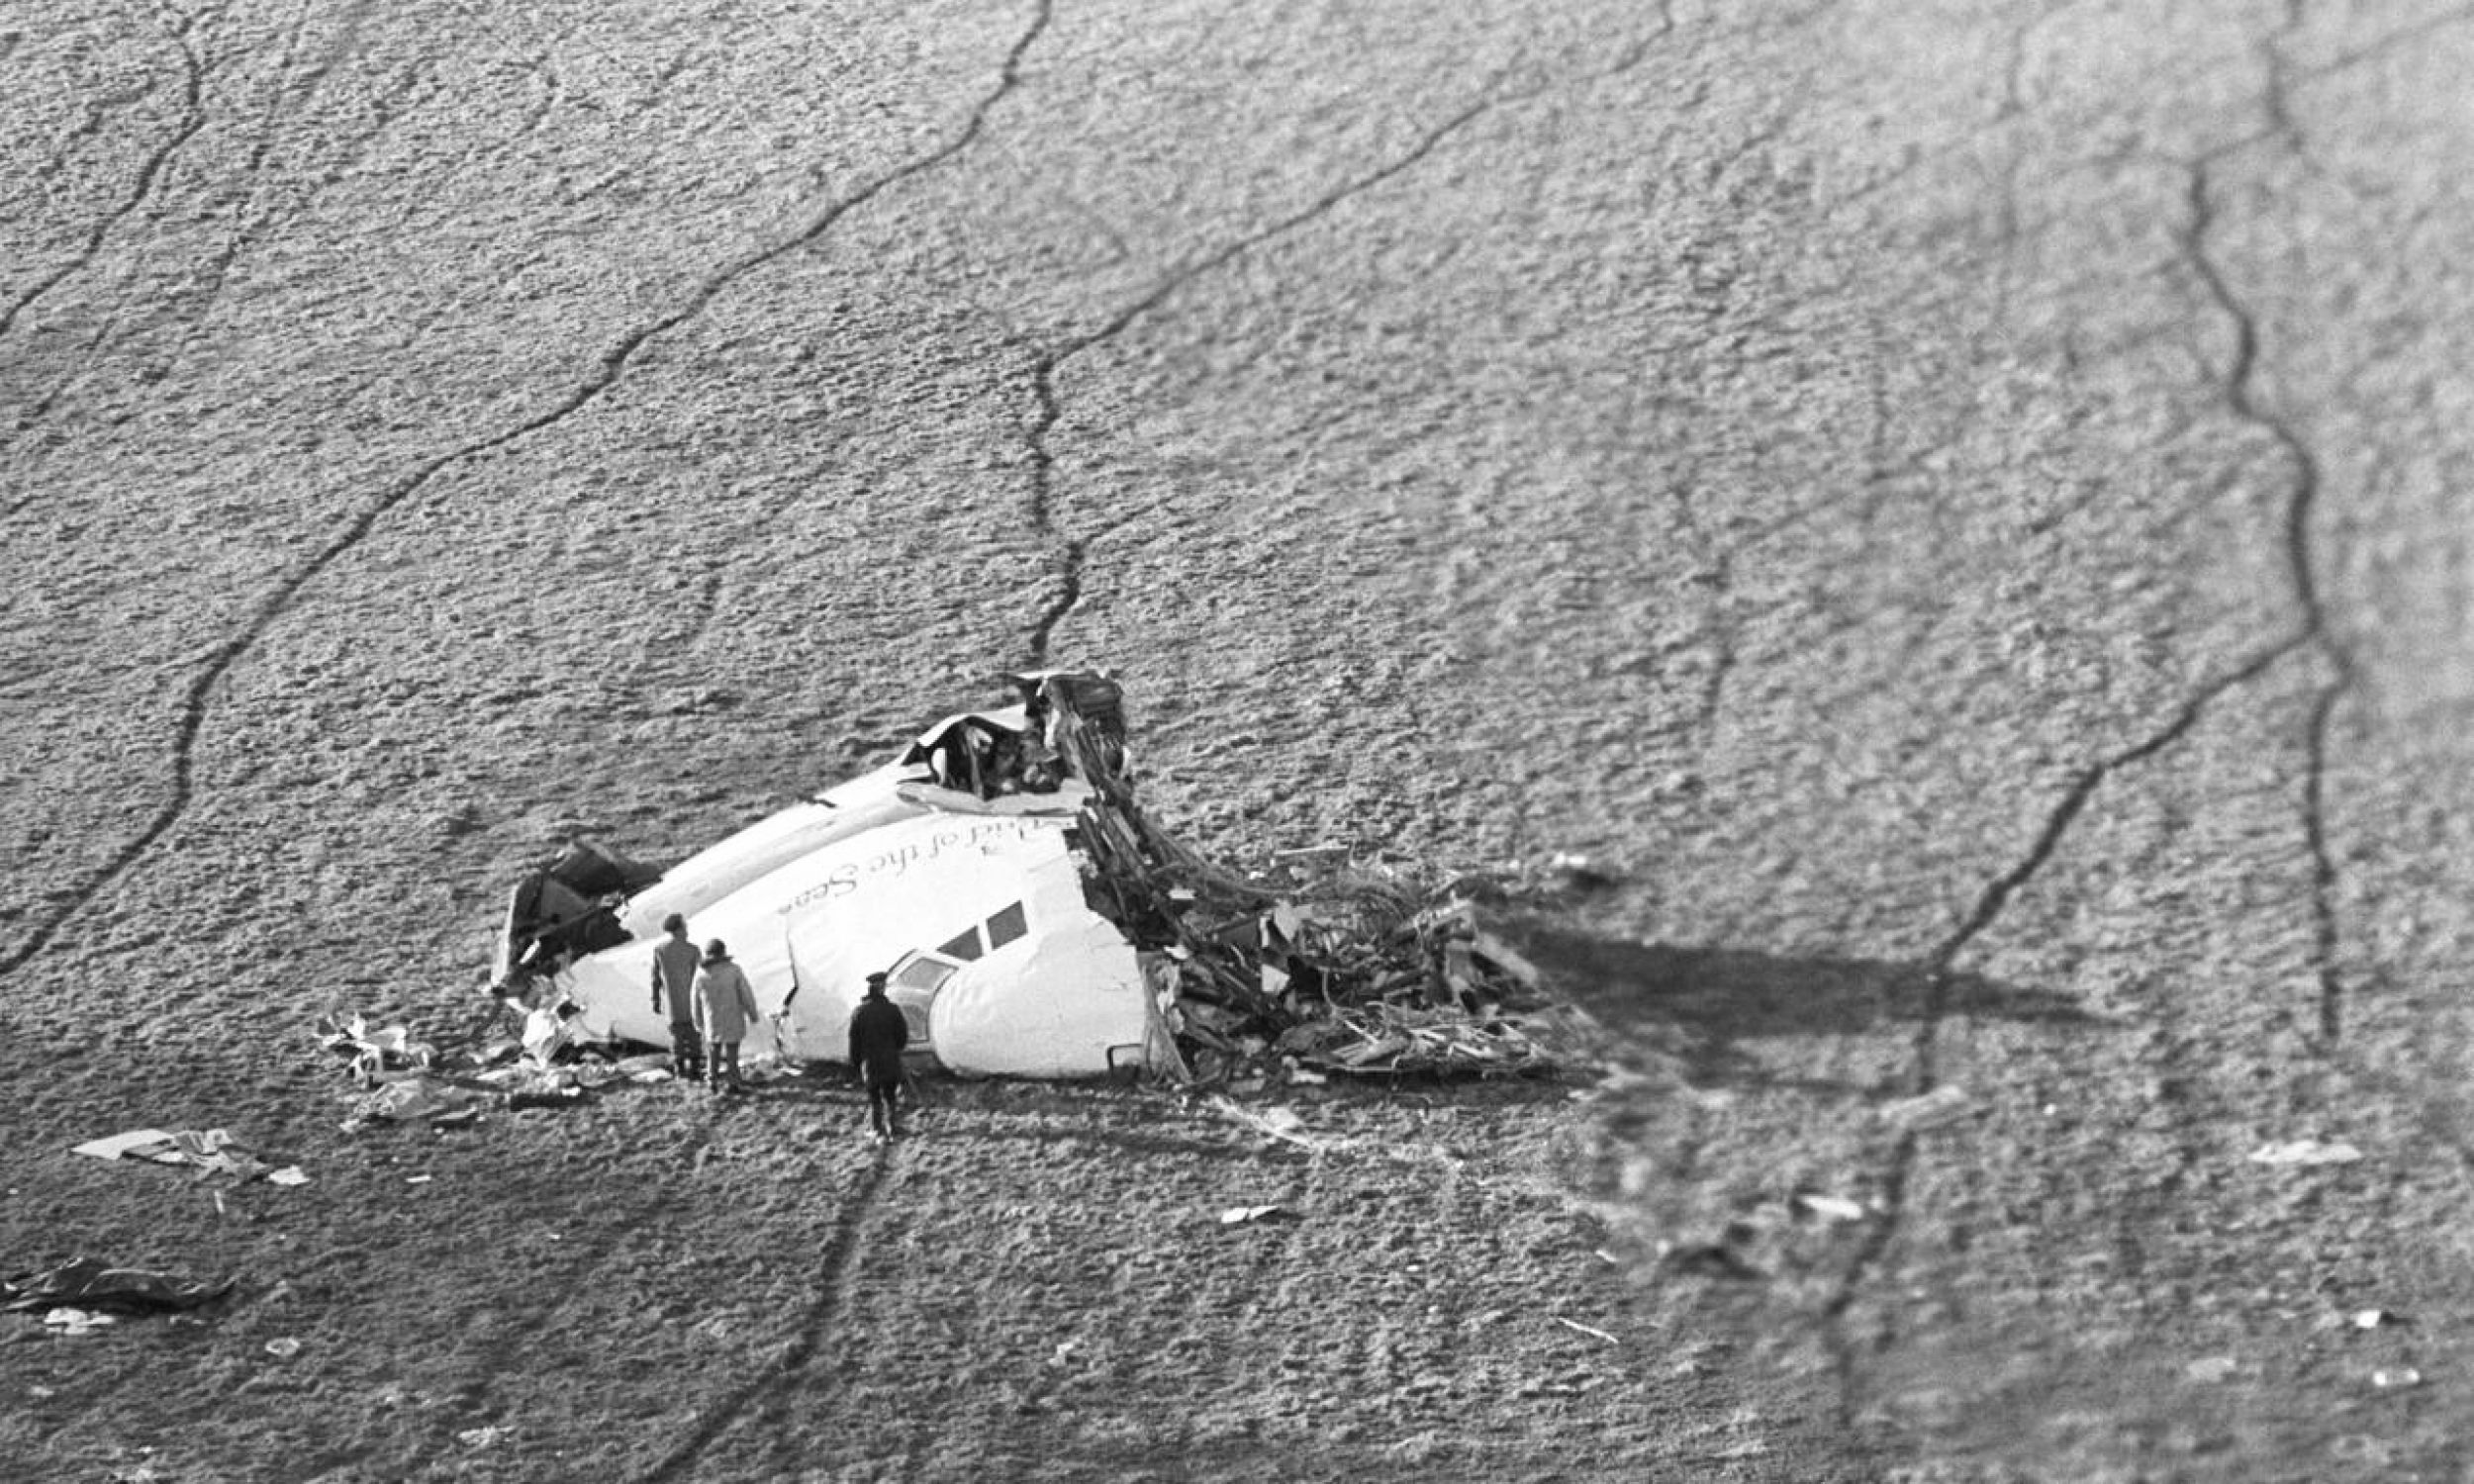 The bomb planted in the plane exploded on December 21, 1988 at 7:03 p.m. Photo PAP/PA